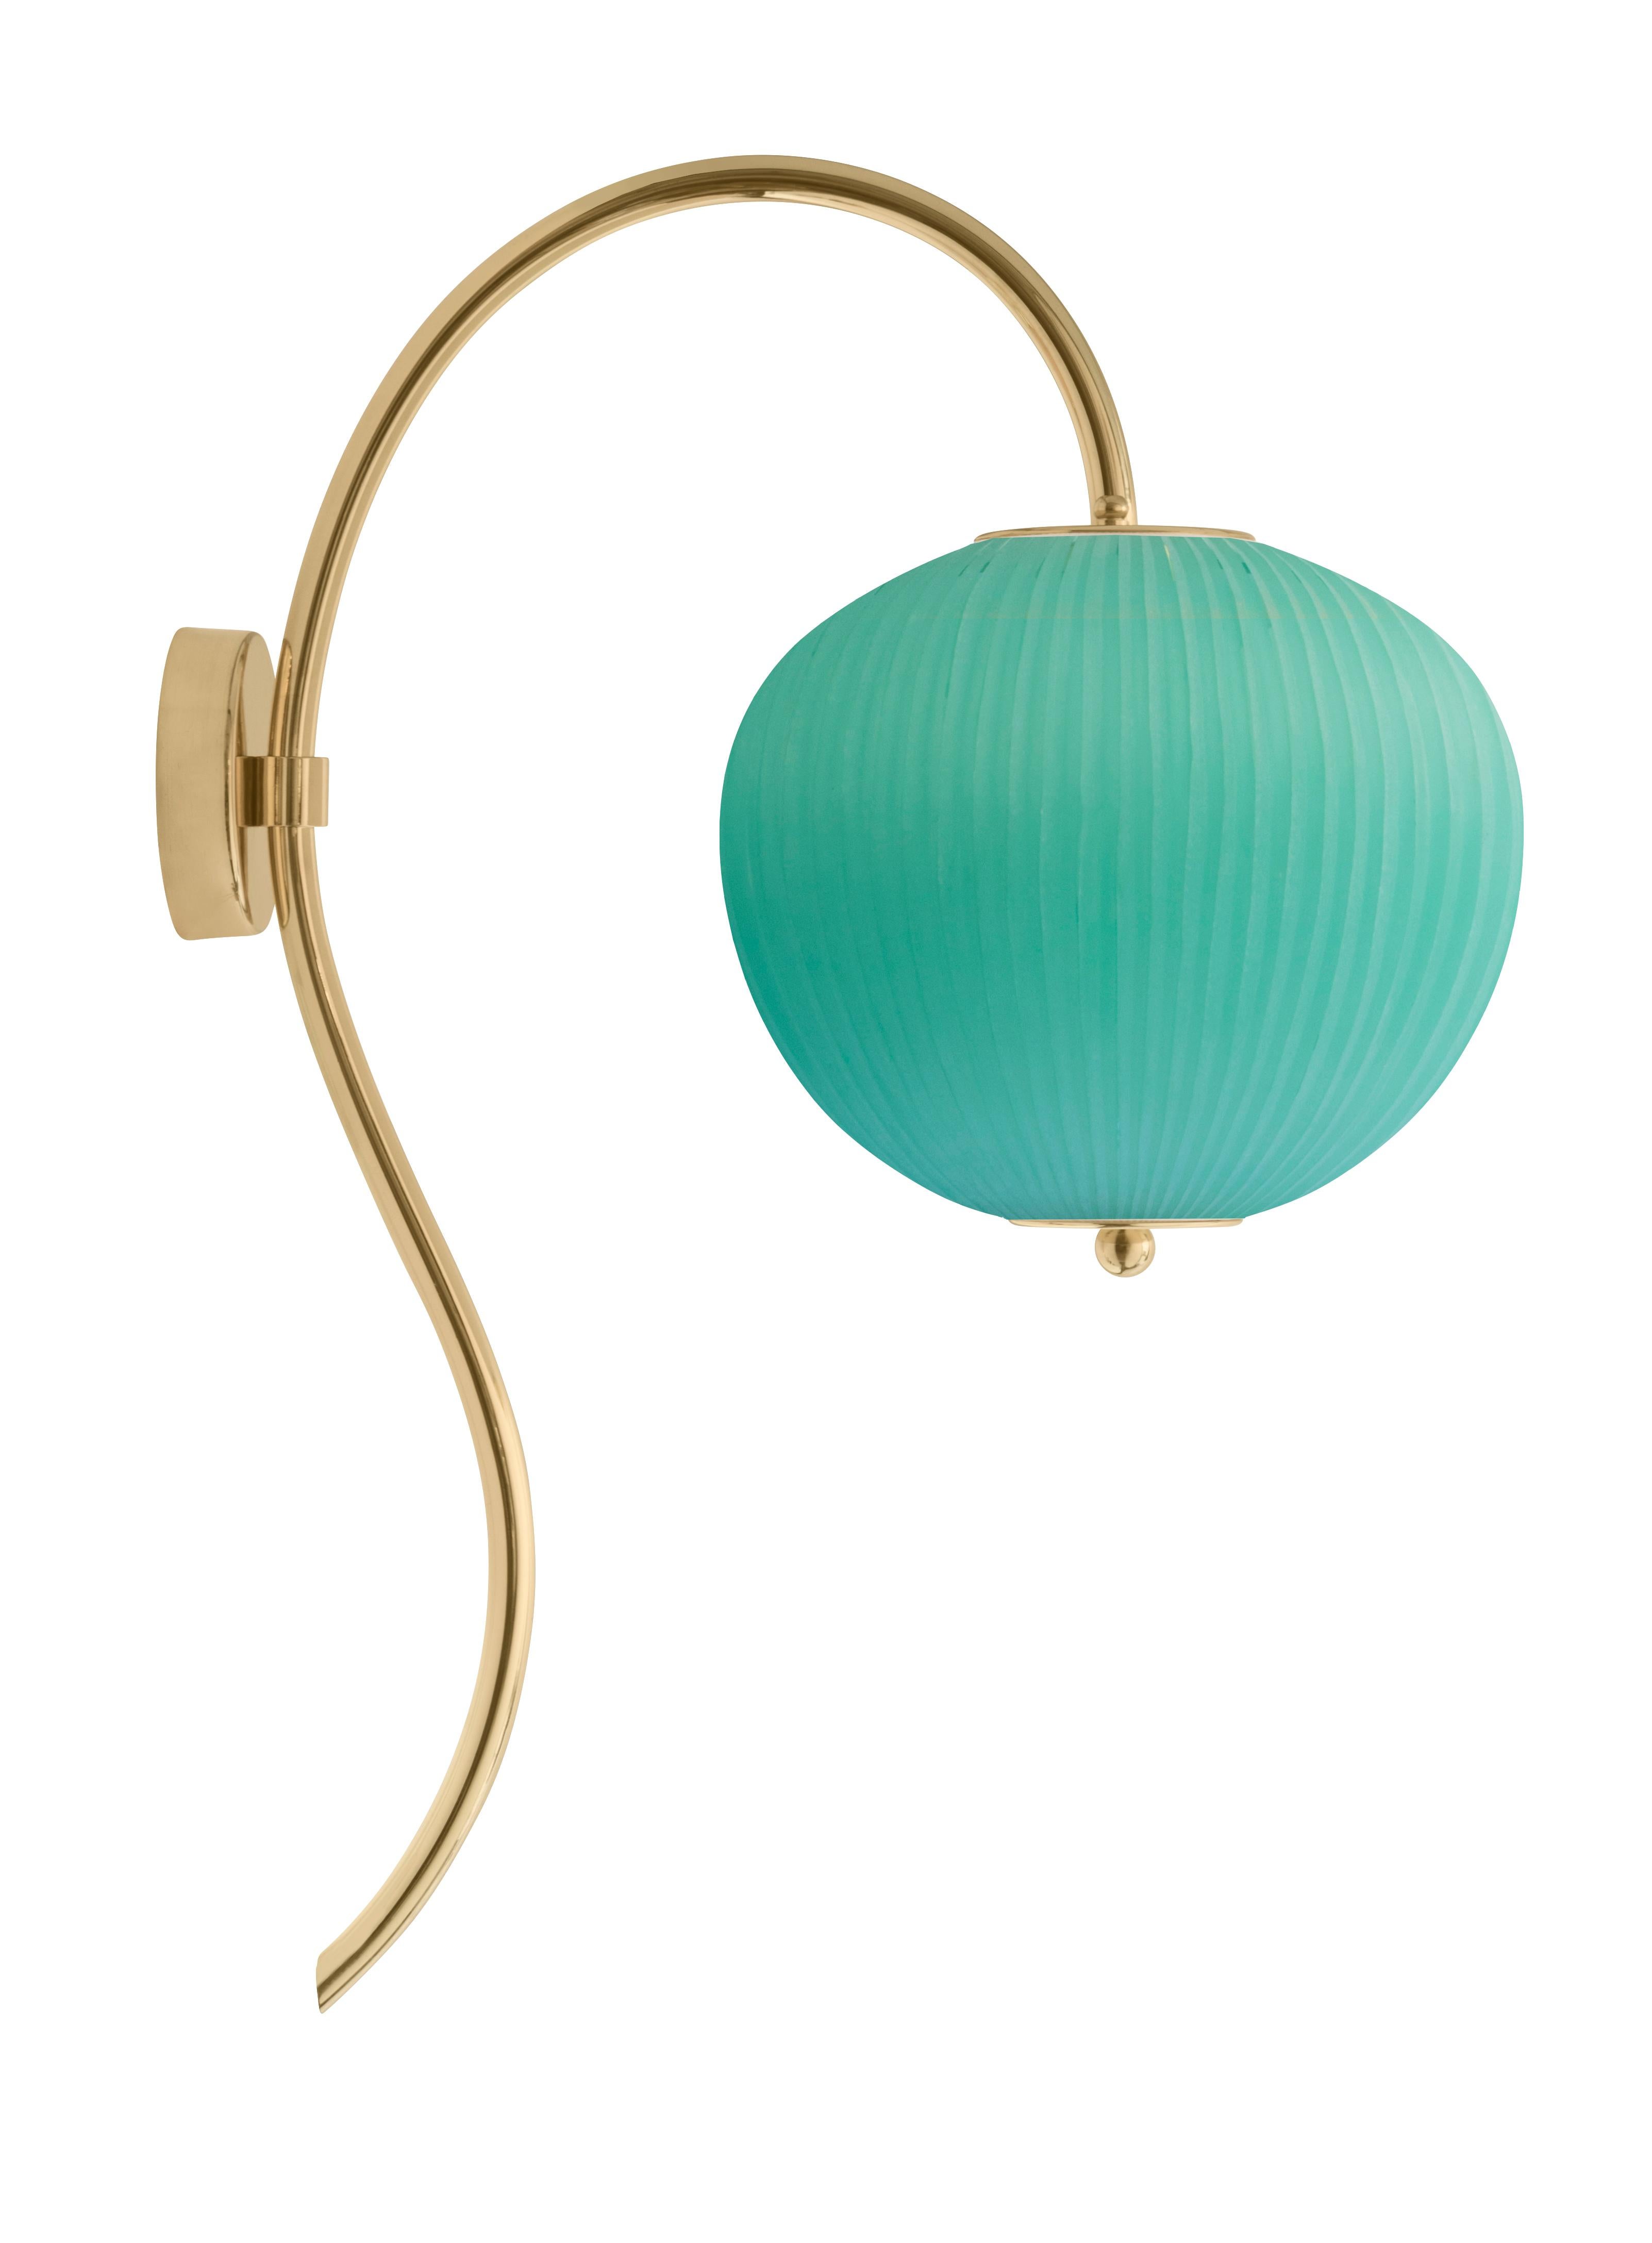 Wall lamp China 03 by Magic Circus Editions
Dimensions: H 62 x W 26.2 x D 41.5 cm
Materials: Brass, mouth blown glass sculpted with a diamond saw
Colour: jade green

Available finishes: Brass, nickel
Available colours: enamel soft white, soft rose,